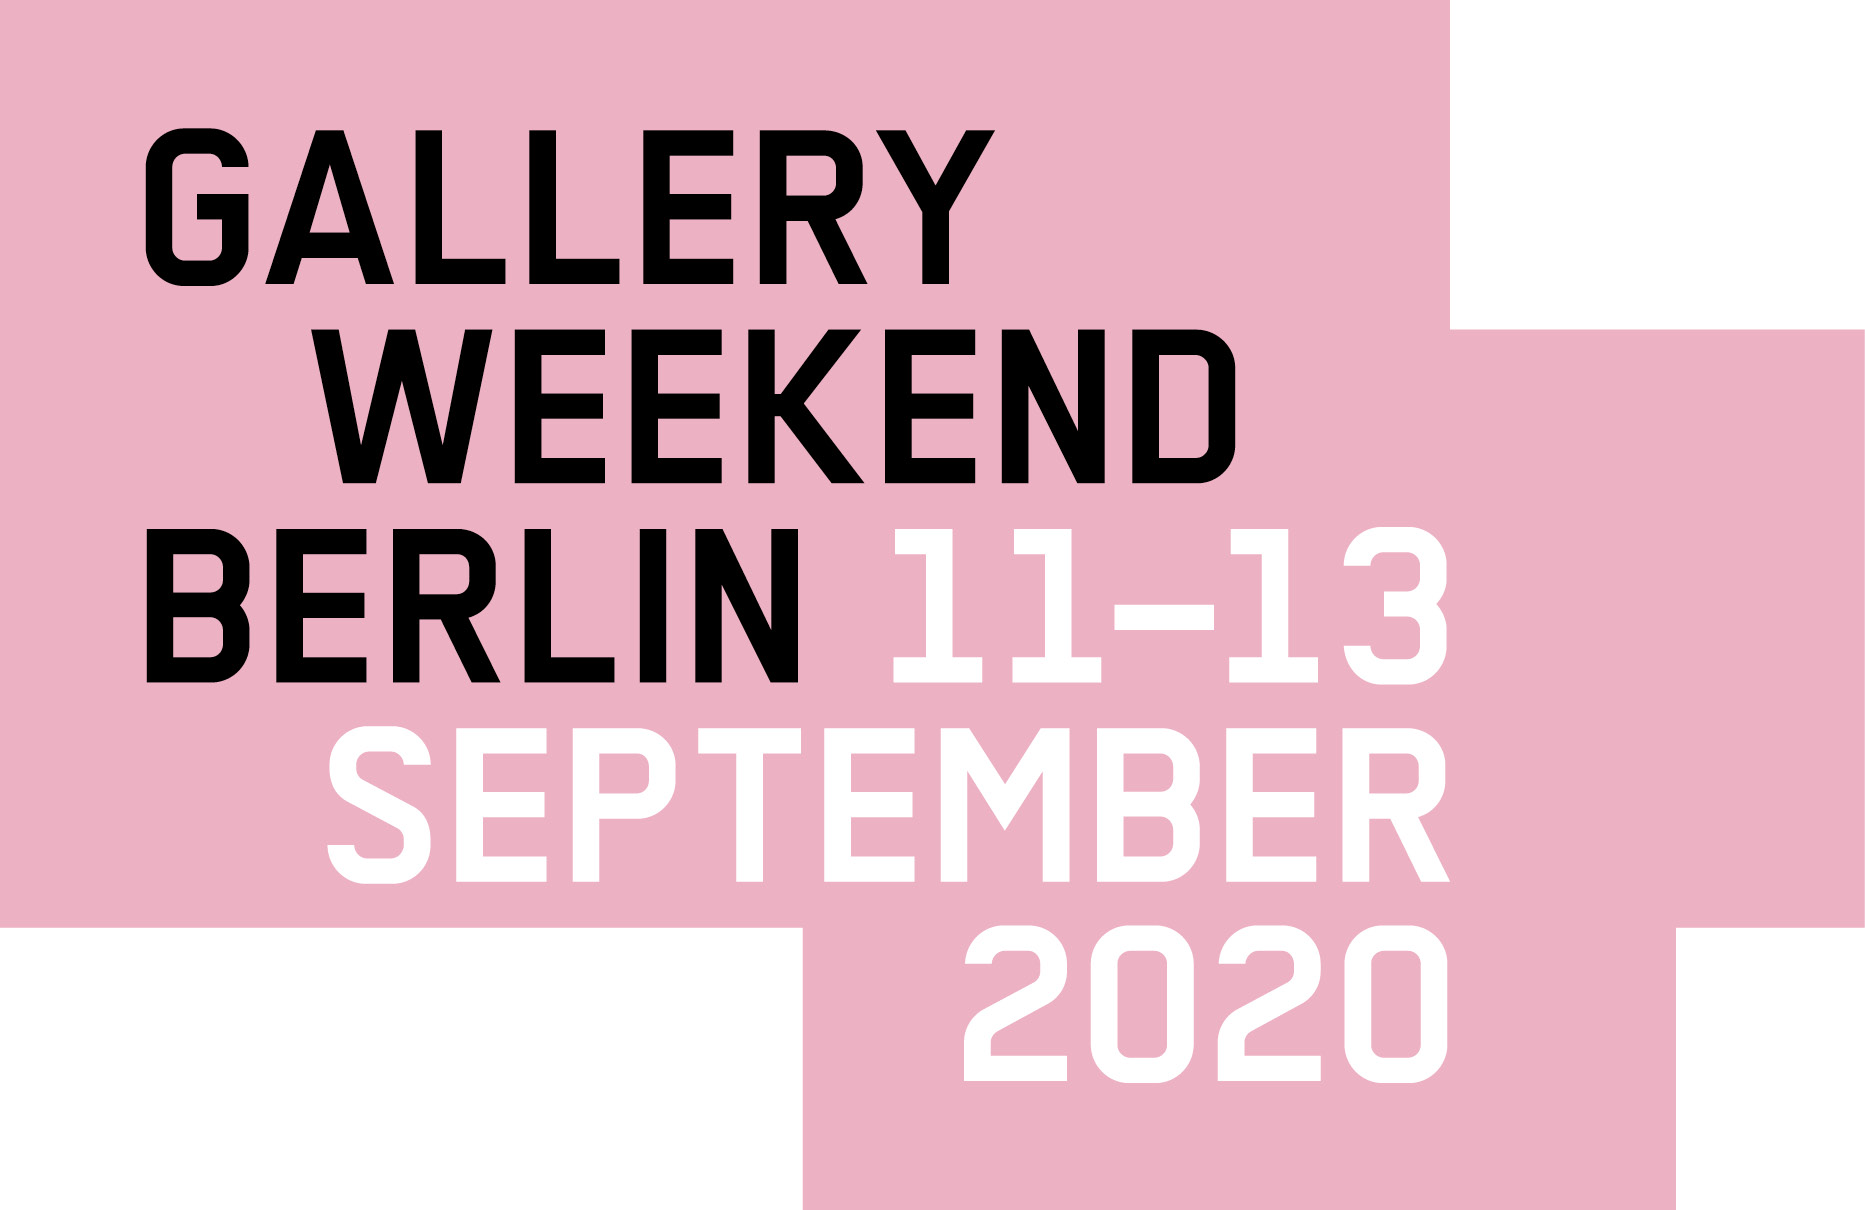 clone weight cat Gallery Weekend Berlin 2020 | BORCH Editions